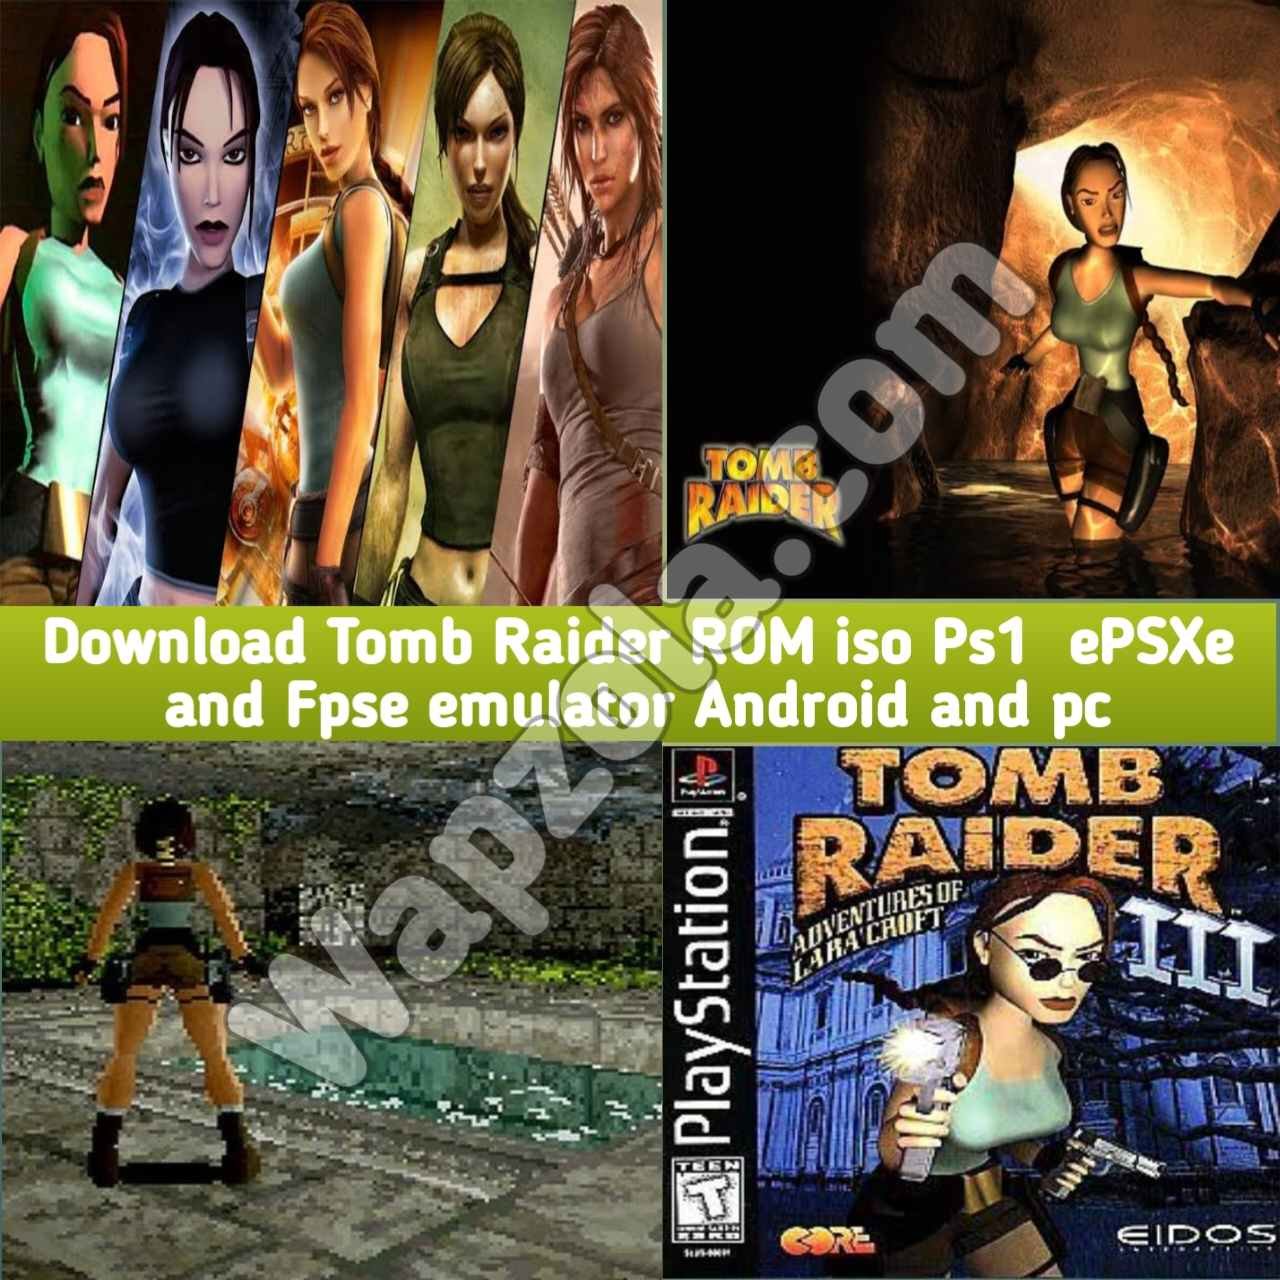 [Download] Tomb Raider ROM (ISO) ePSXe and Fpse emulator (15MB size) highly compressed – Sony Playstation / PSX / PS1 APK BIN/CUE play on Android and pc